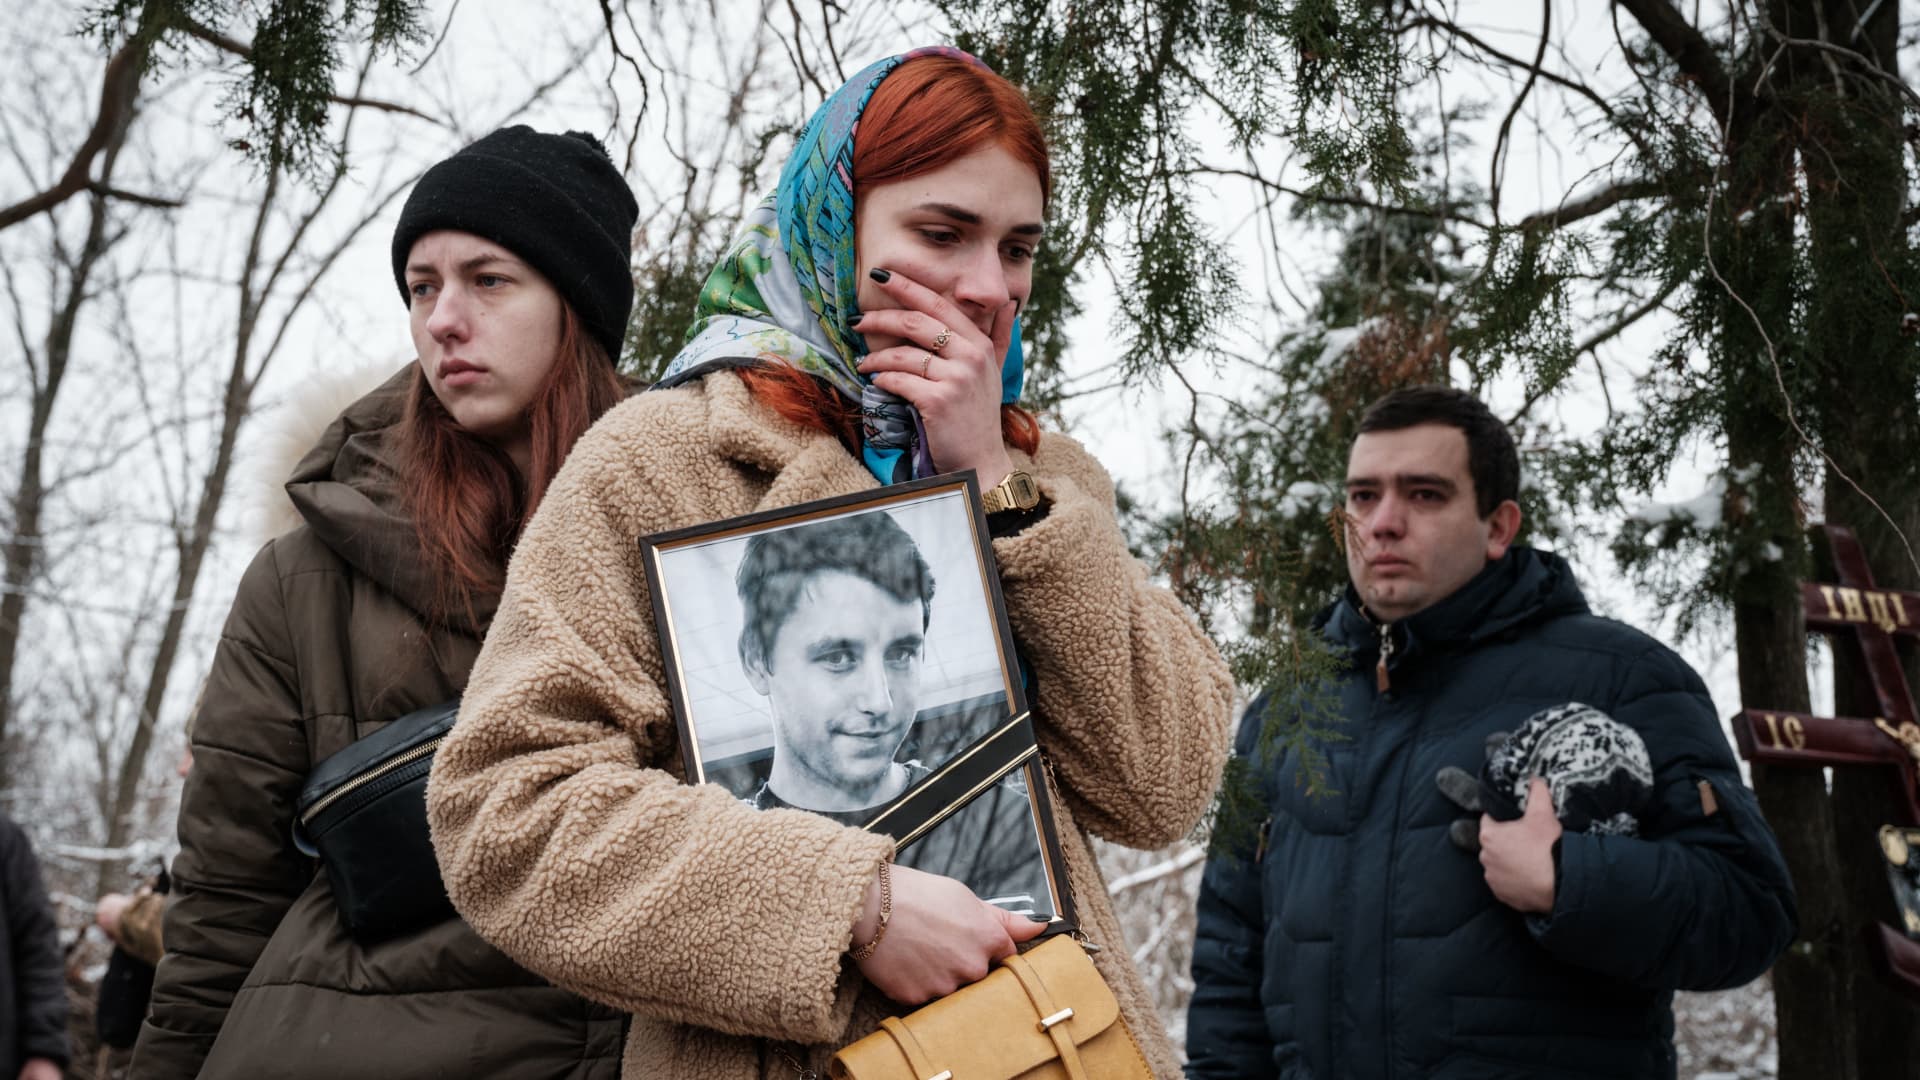 Kateryna Avdeyeva (C), mourns as she holds a portrait of her late friend, Ukrainian serviceman of the Azov battalion killed in action in Bakhmut, 28-year-old orphan Oleksandr Korovniy, as she attends his funeral ceremony at a cemetery in Sloviansk on January 30, 2023, amid the Russian invasion of Ukraine.